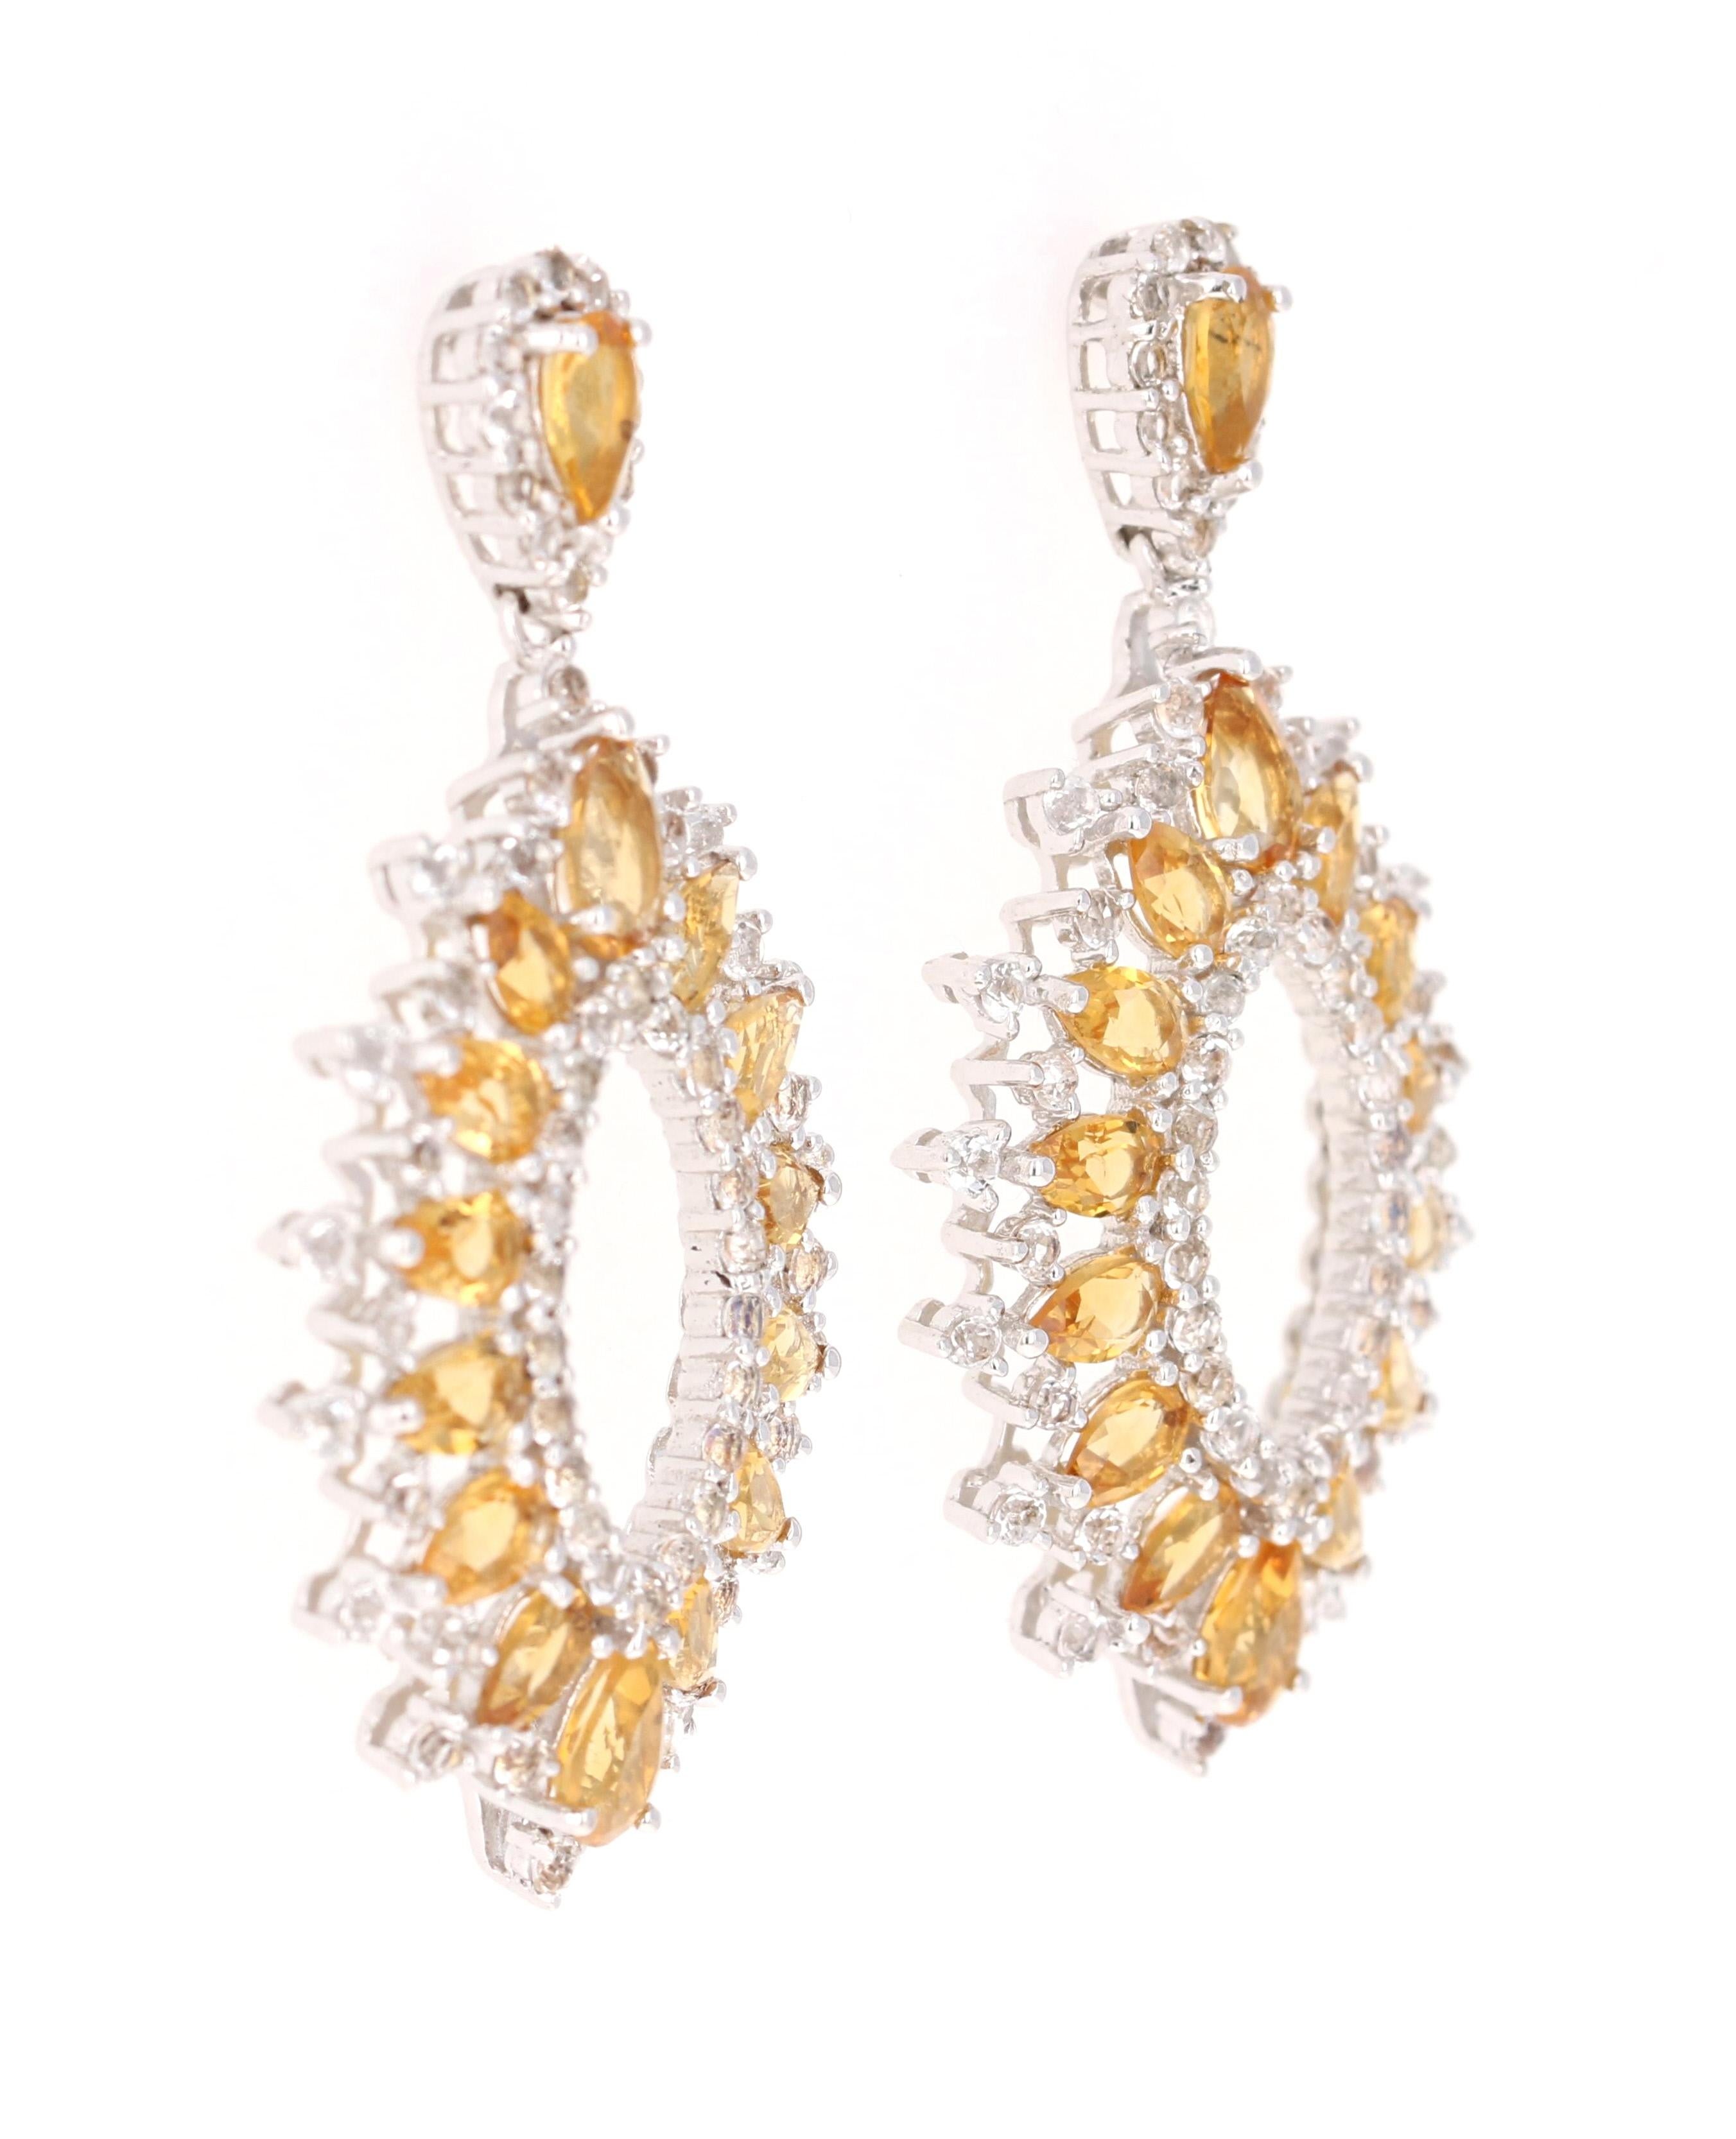 Stunning Chandelier Dangle Earrings 

These earrings have 6.25 Carats of Citrines and White Topaz.

They are beautifully curated in 925 Silver weighing approximately 11.0 grams 

They are 1.75 inches long. 
